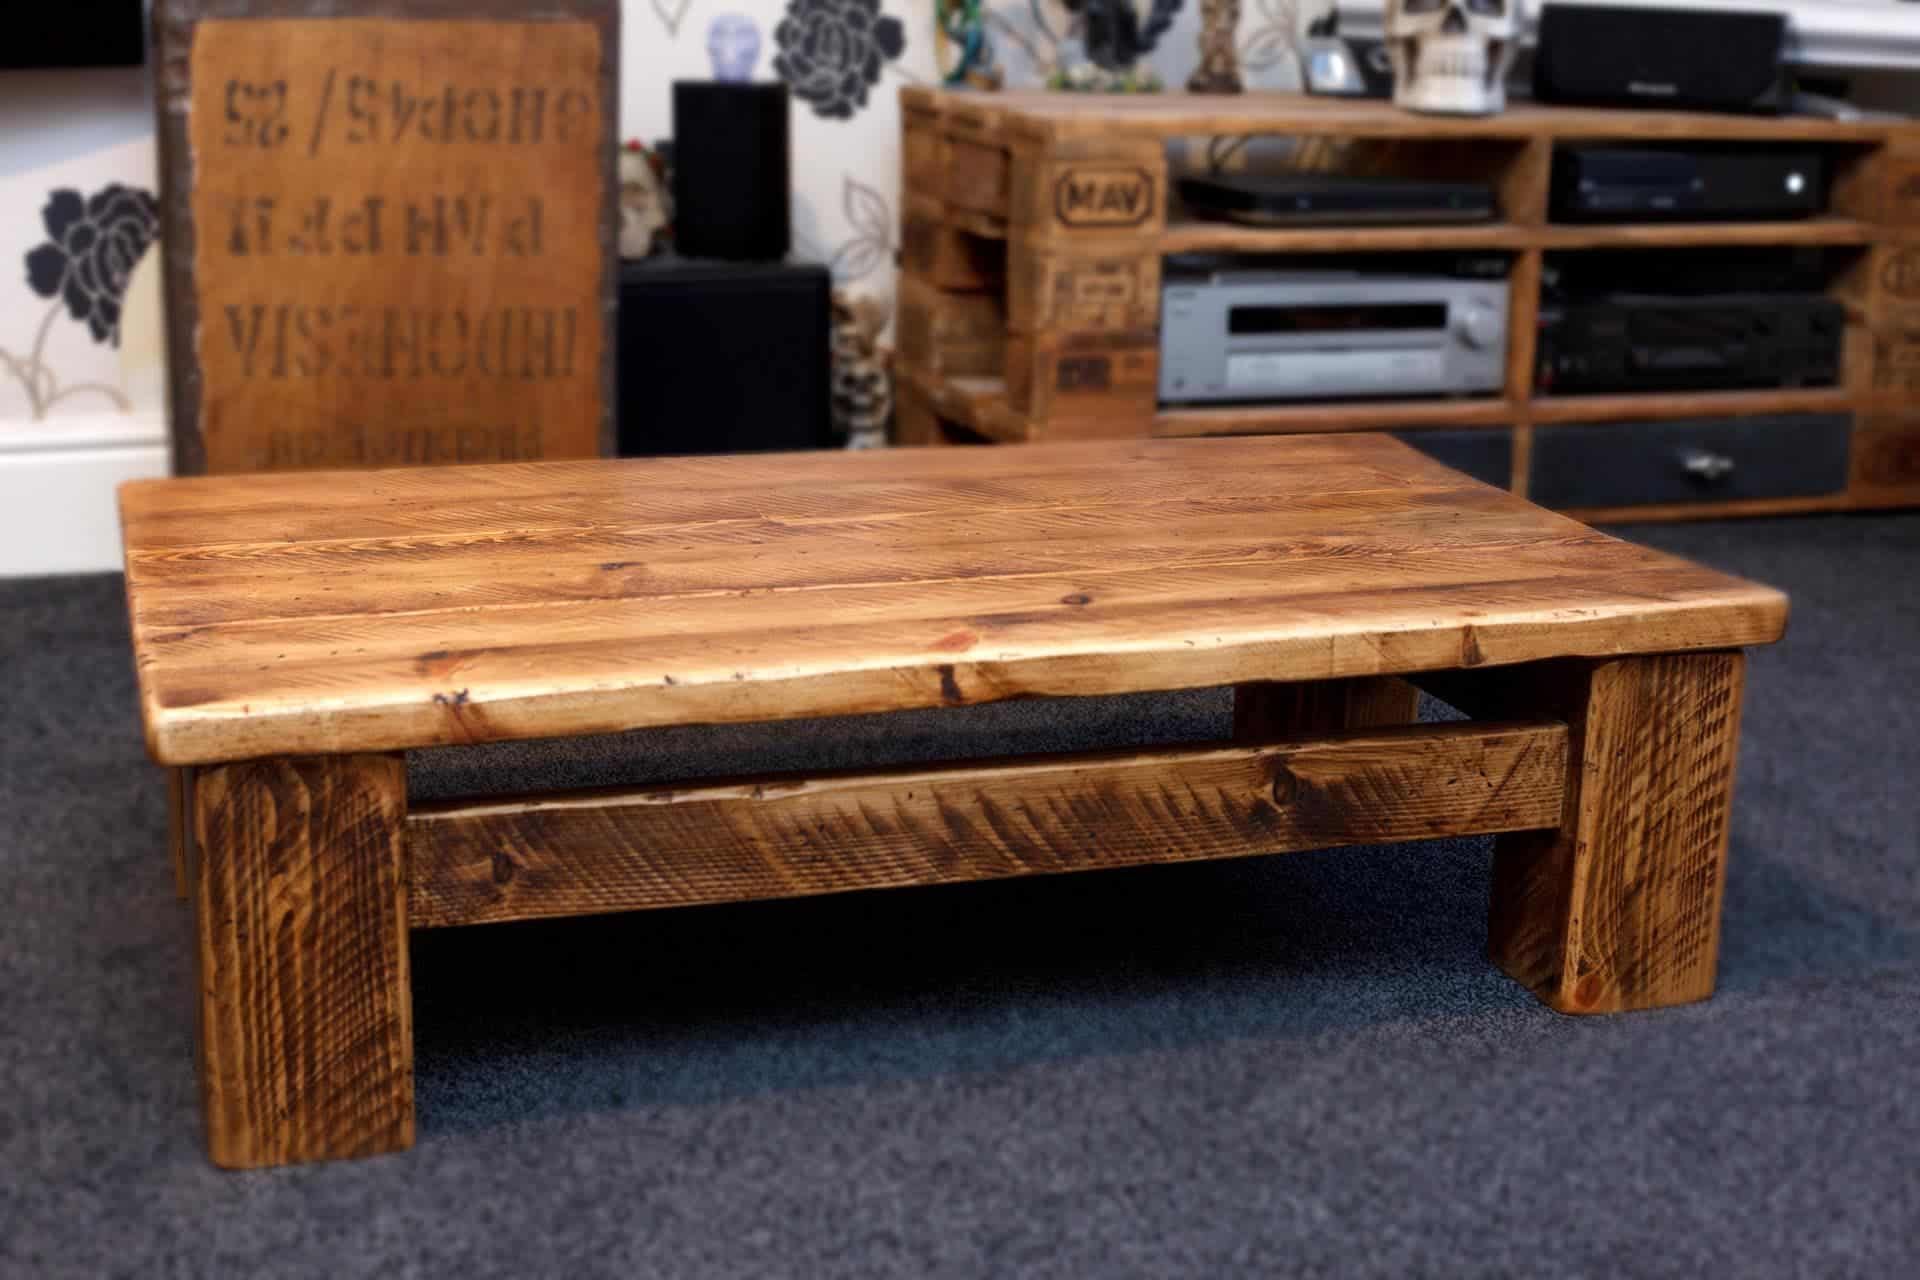 Sherwood Rustic Plank Low Down Coffee Table – Aj's Farmhouse Furniture With Plank Coffee Tables (View 15 of 20)